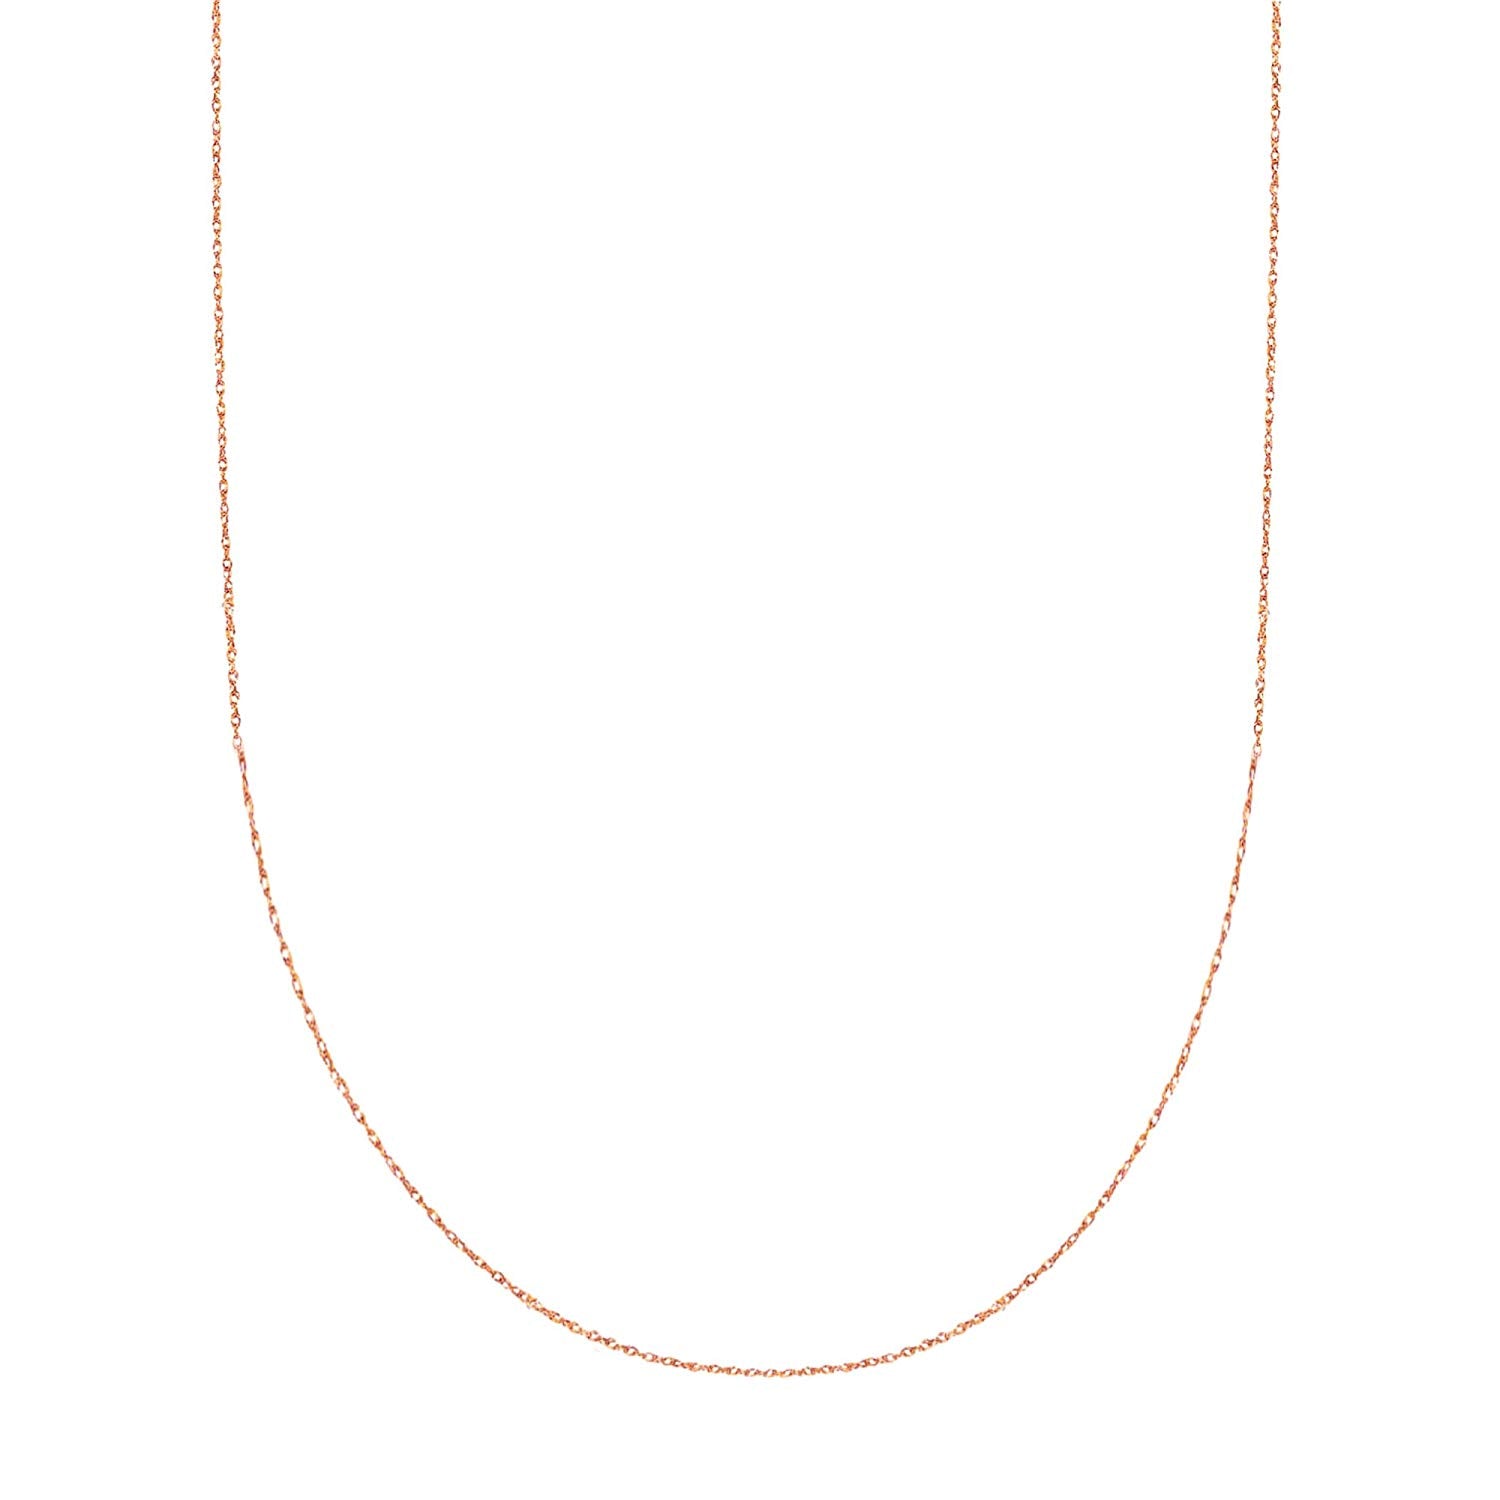 14k Rose Gold Rope Chain Necklace, 0.7mm, 18" fine designer jewelry for men and women